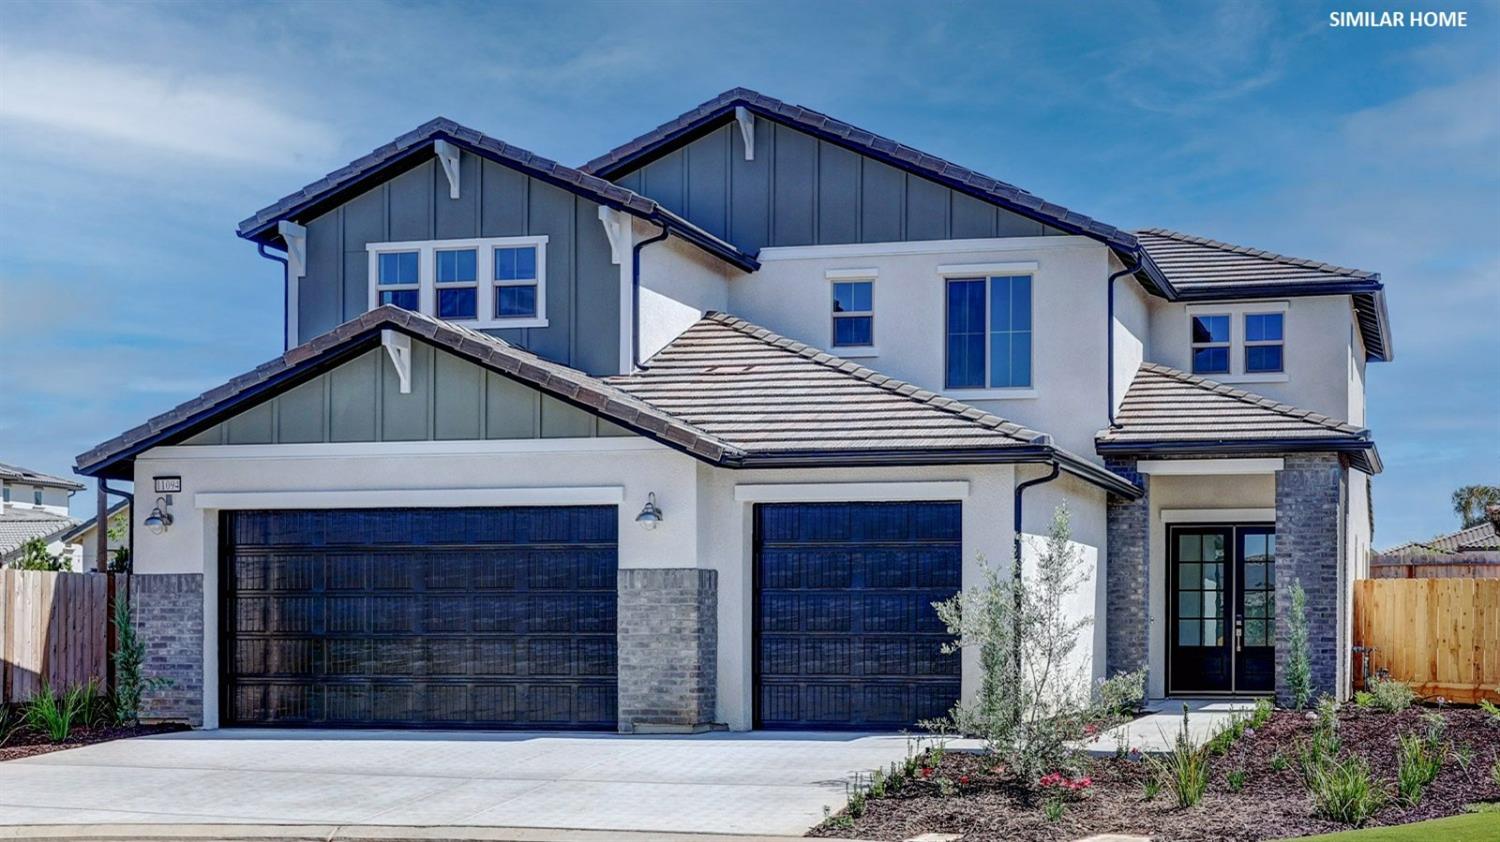 Photo of 20142 Hazelwood Ln in Friant, CA